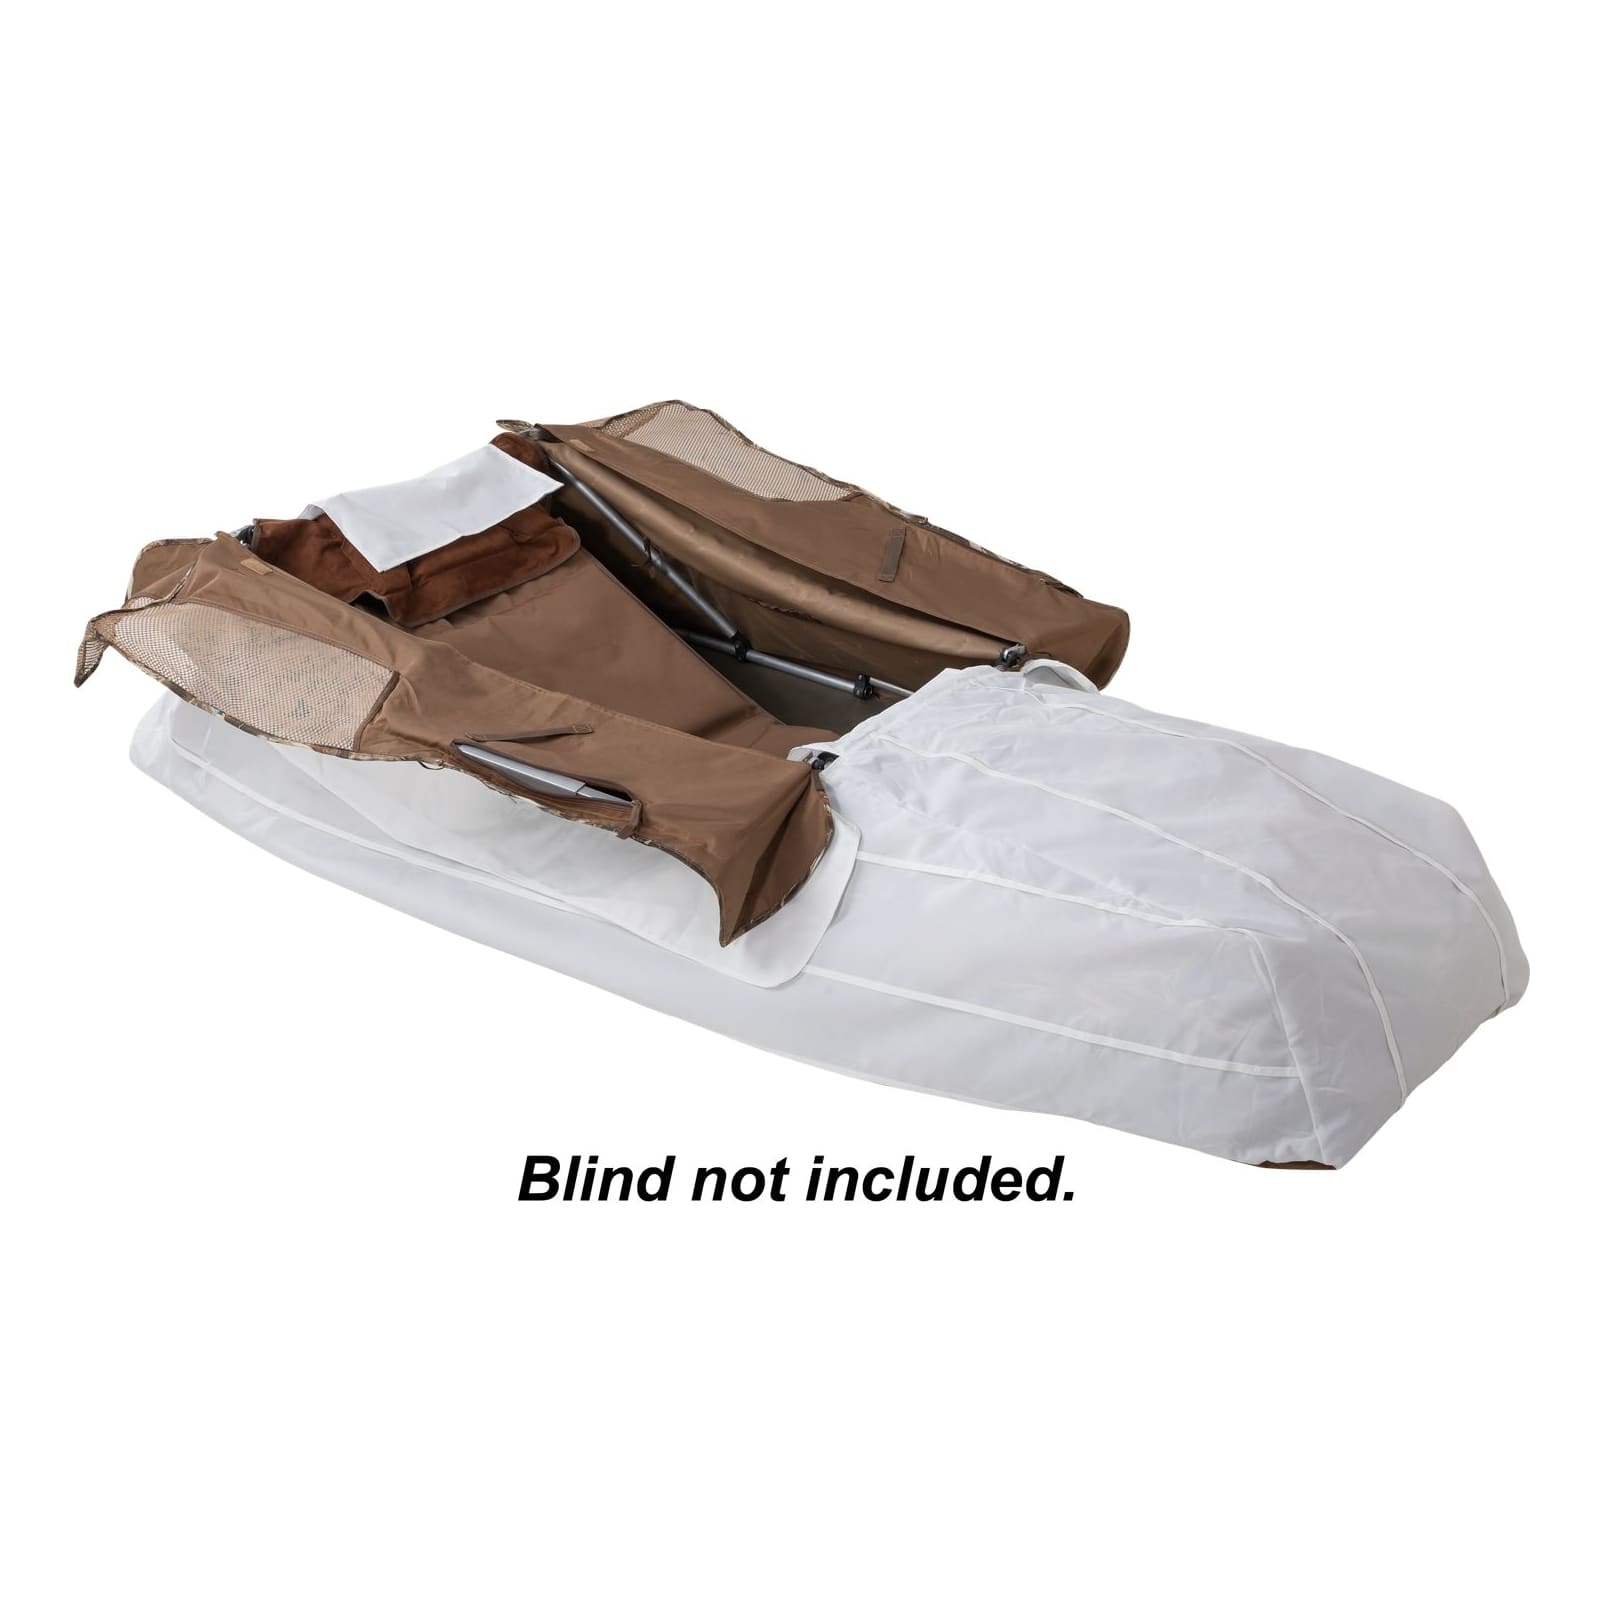 Northern Flight® Renegade Layout Blind Snow Cover